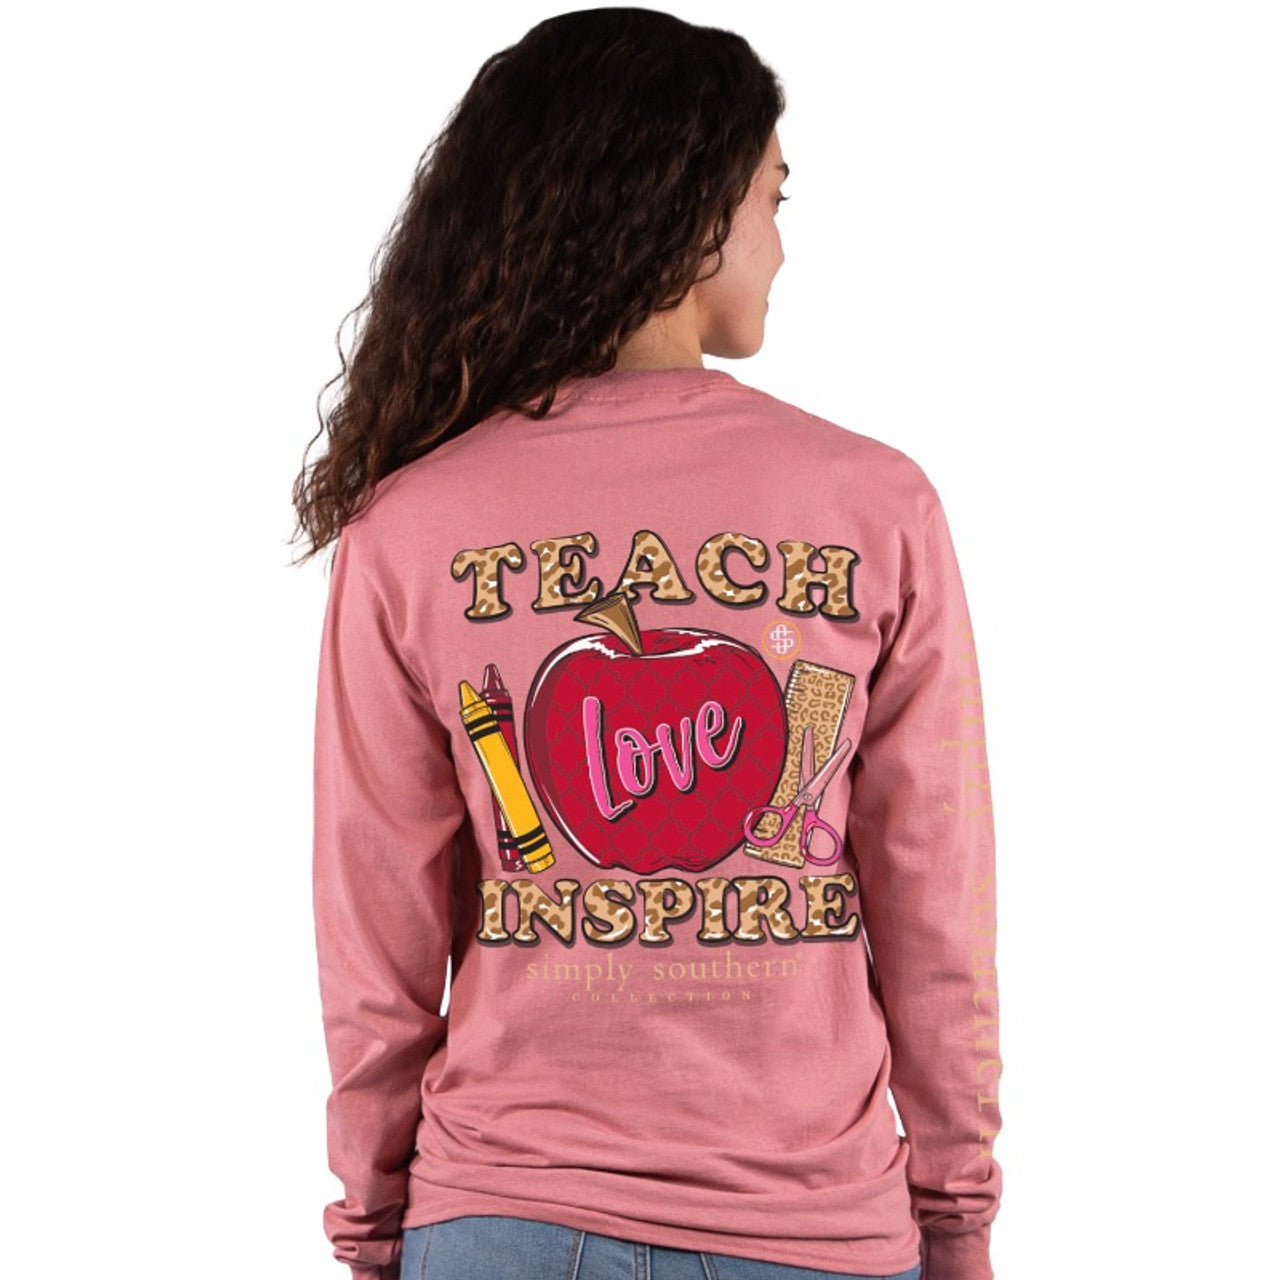 Long sleeve shirt featuring the words "Teach, love and inspire" with classic school supplies such as crowns, scissors and an apple.